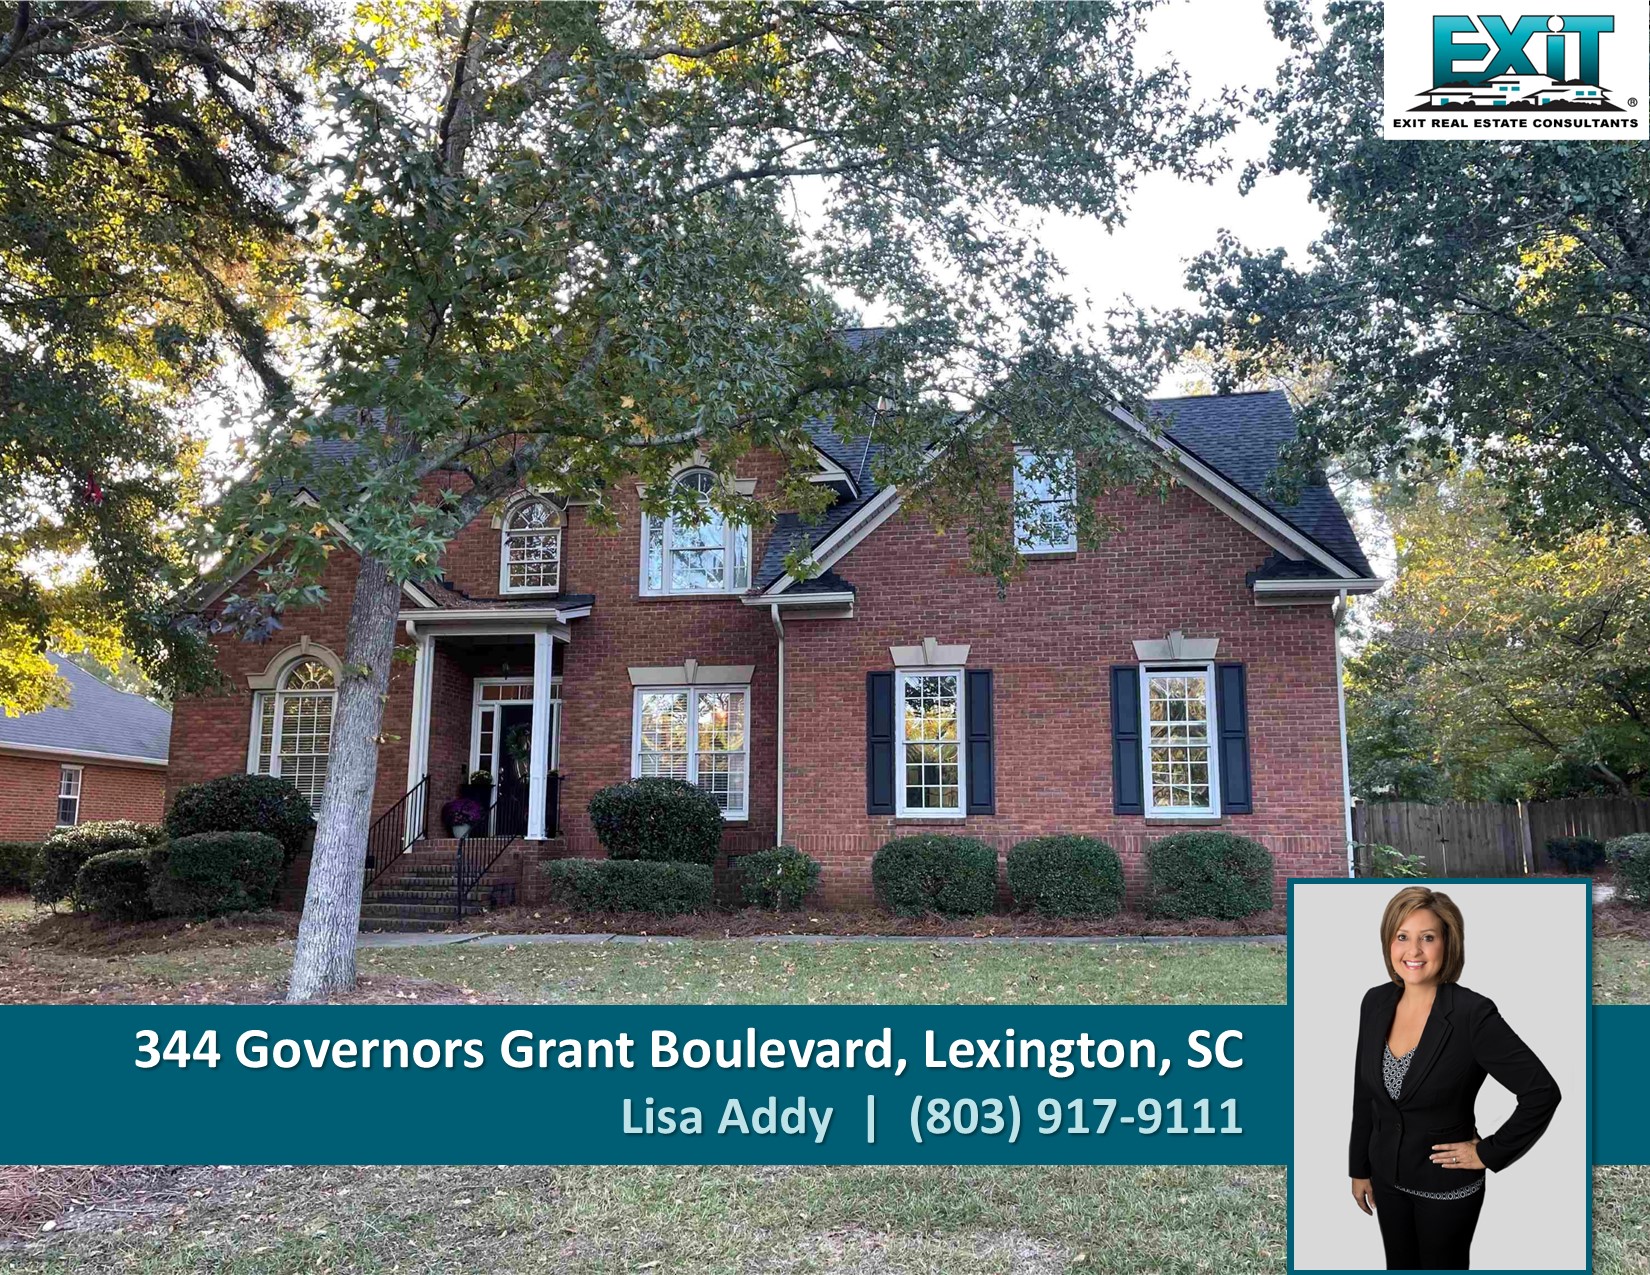 Just listed in Governors Grant